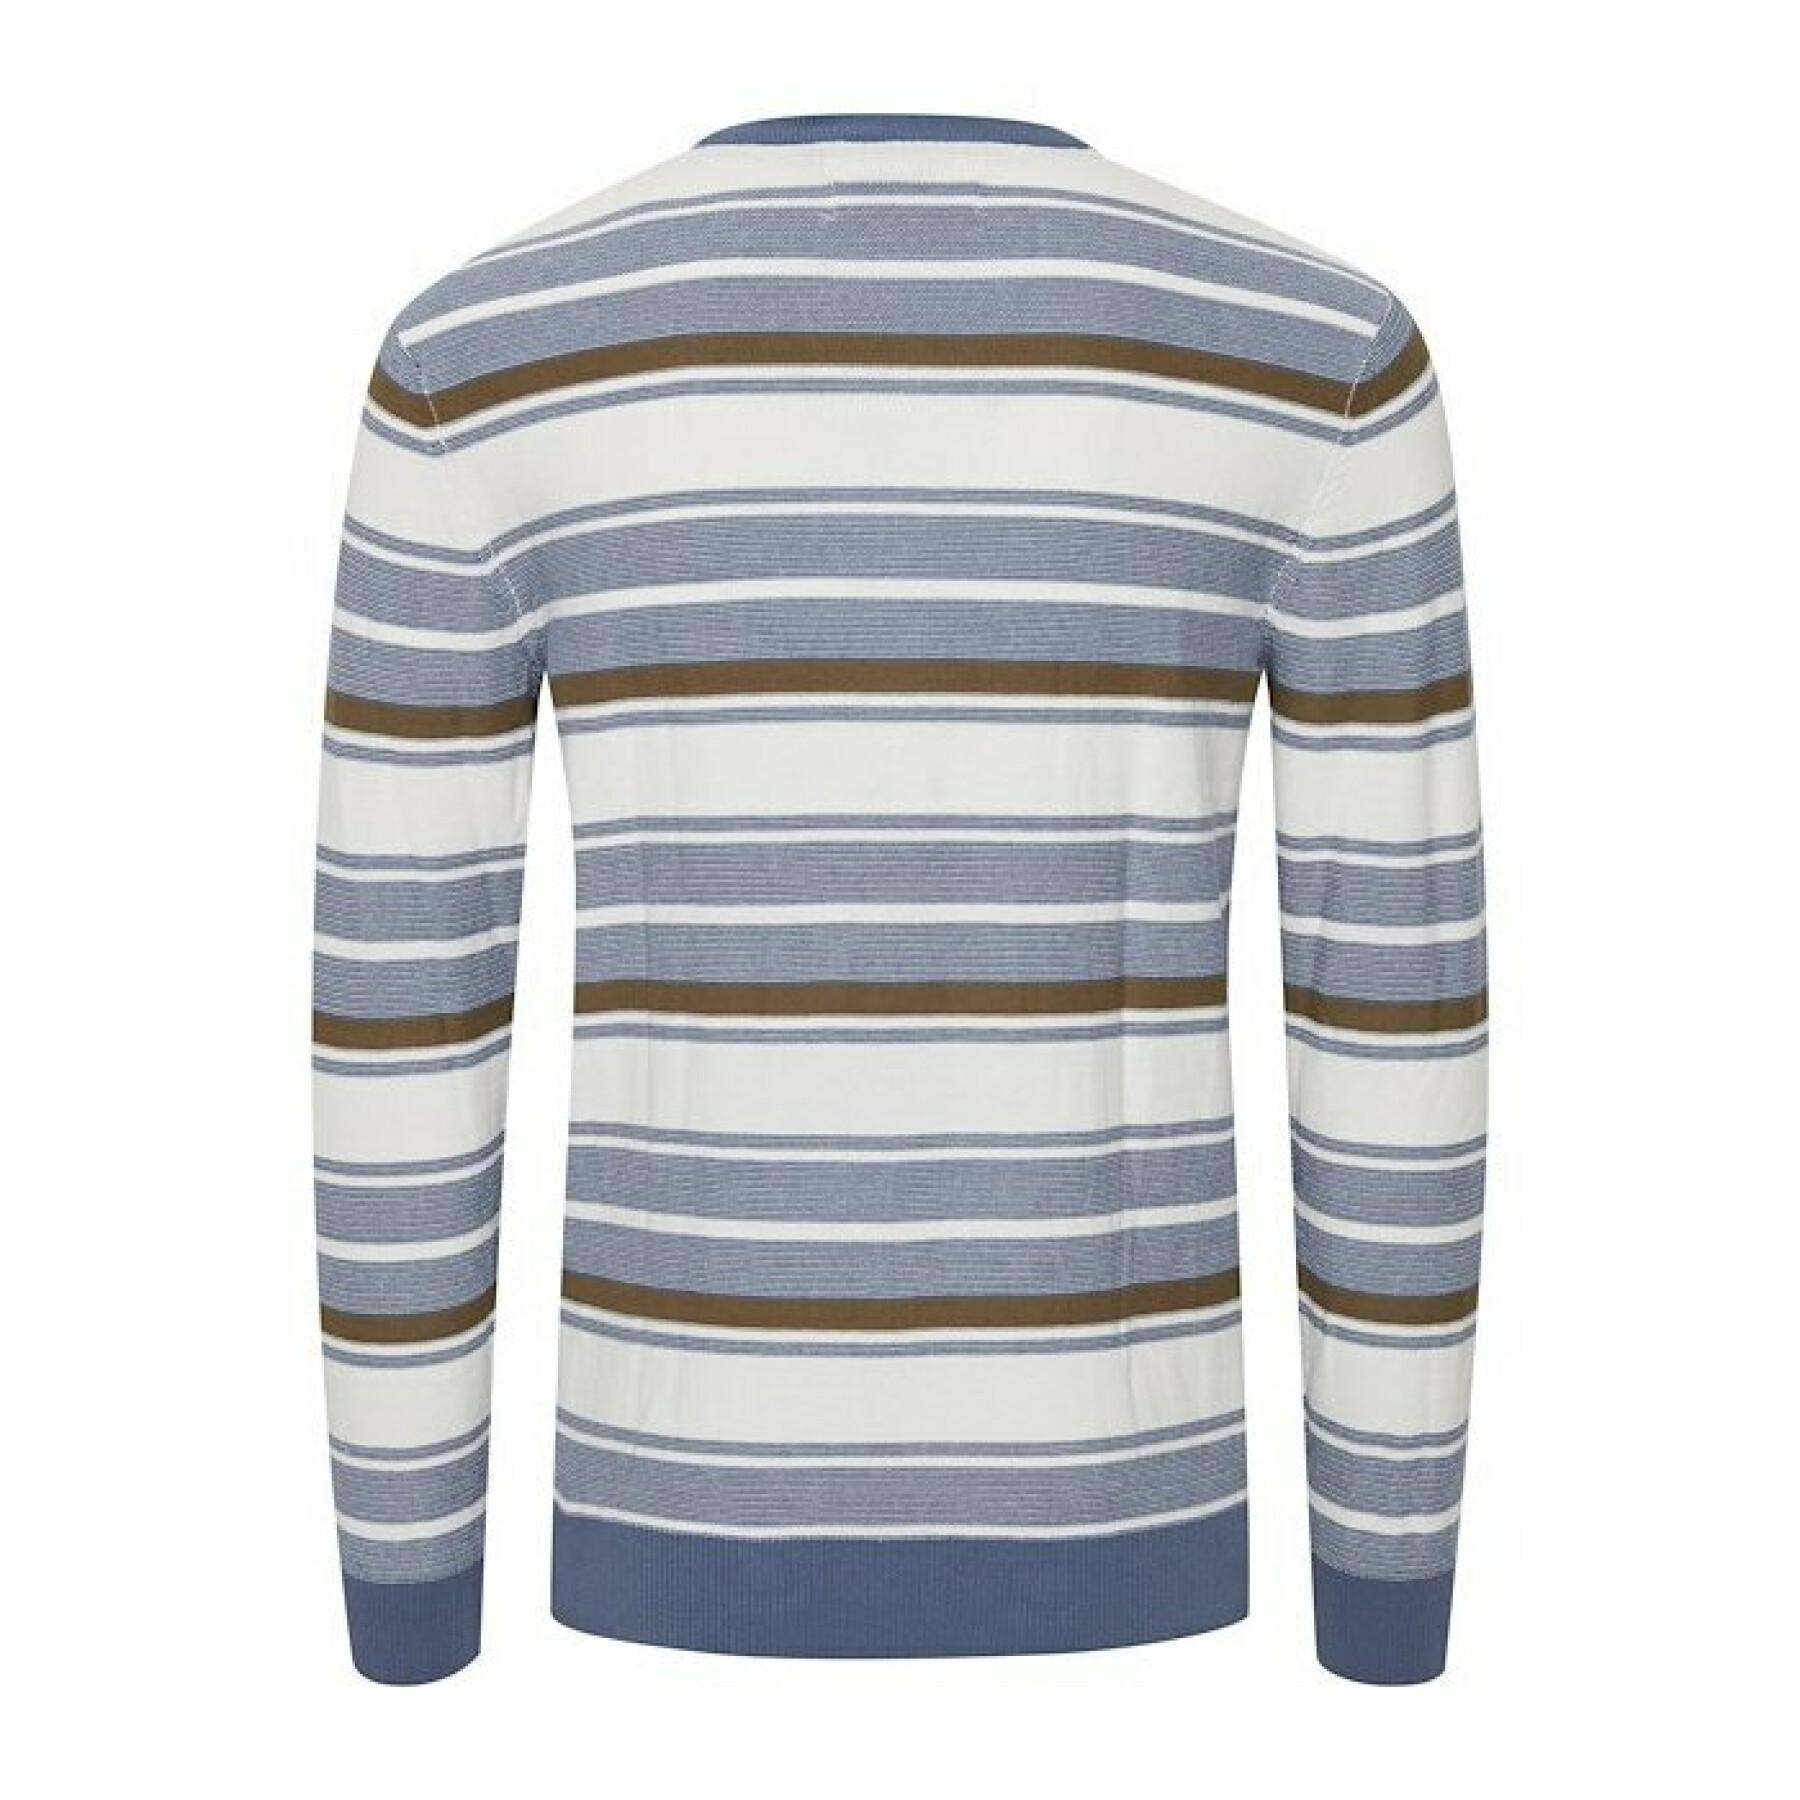 Woman's striped sweater Blend